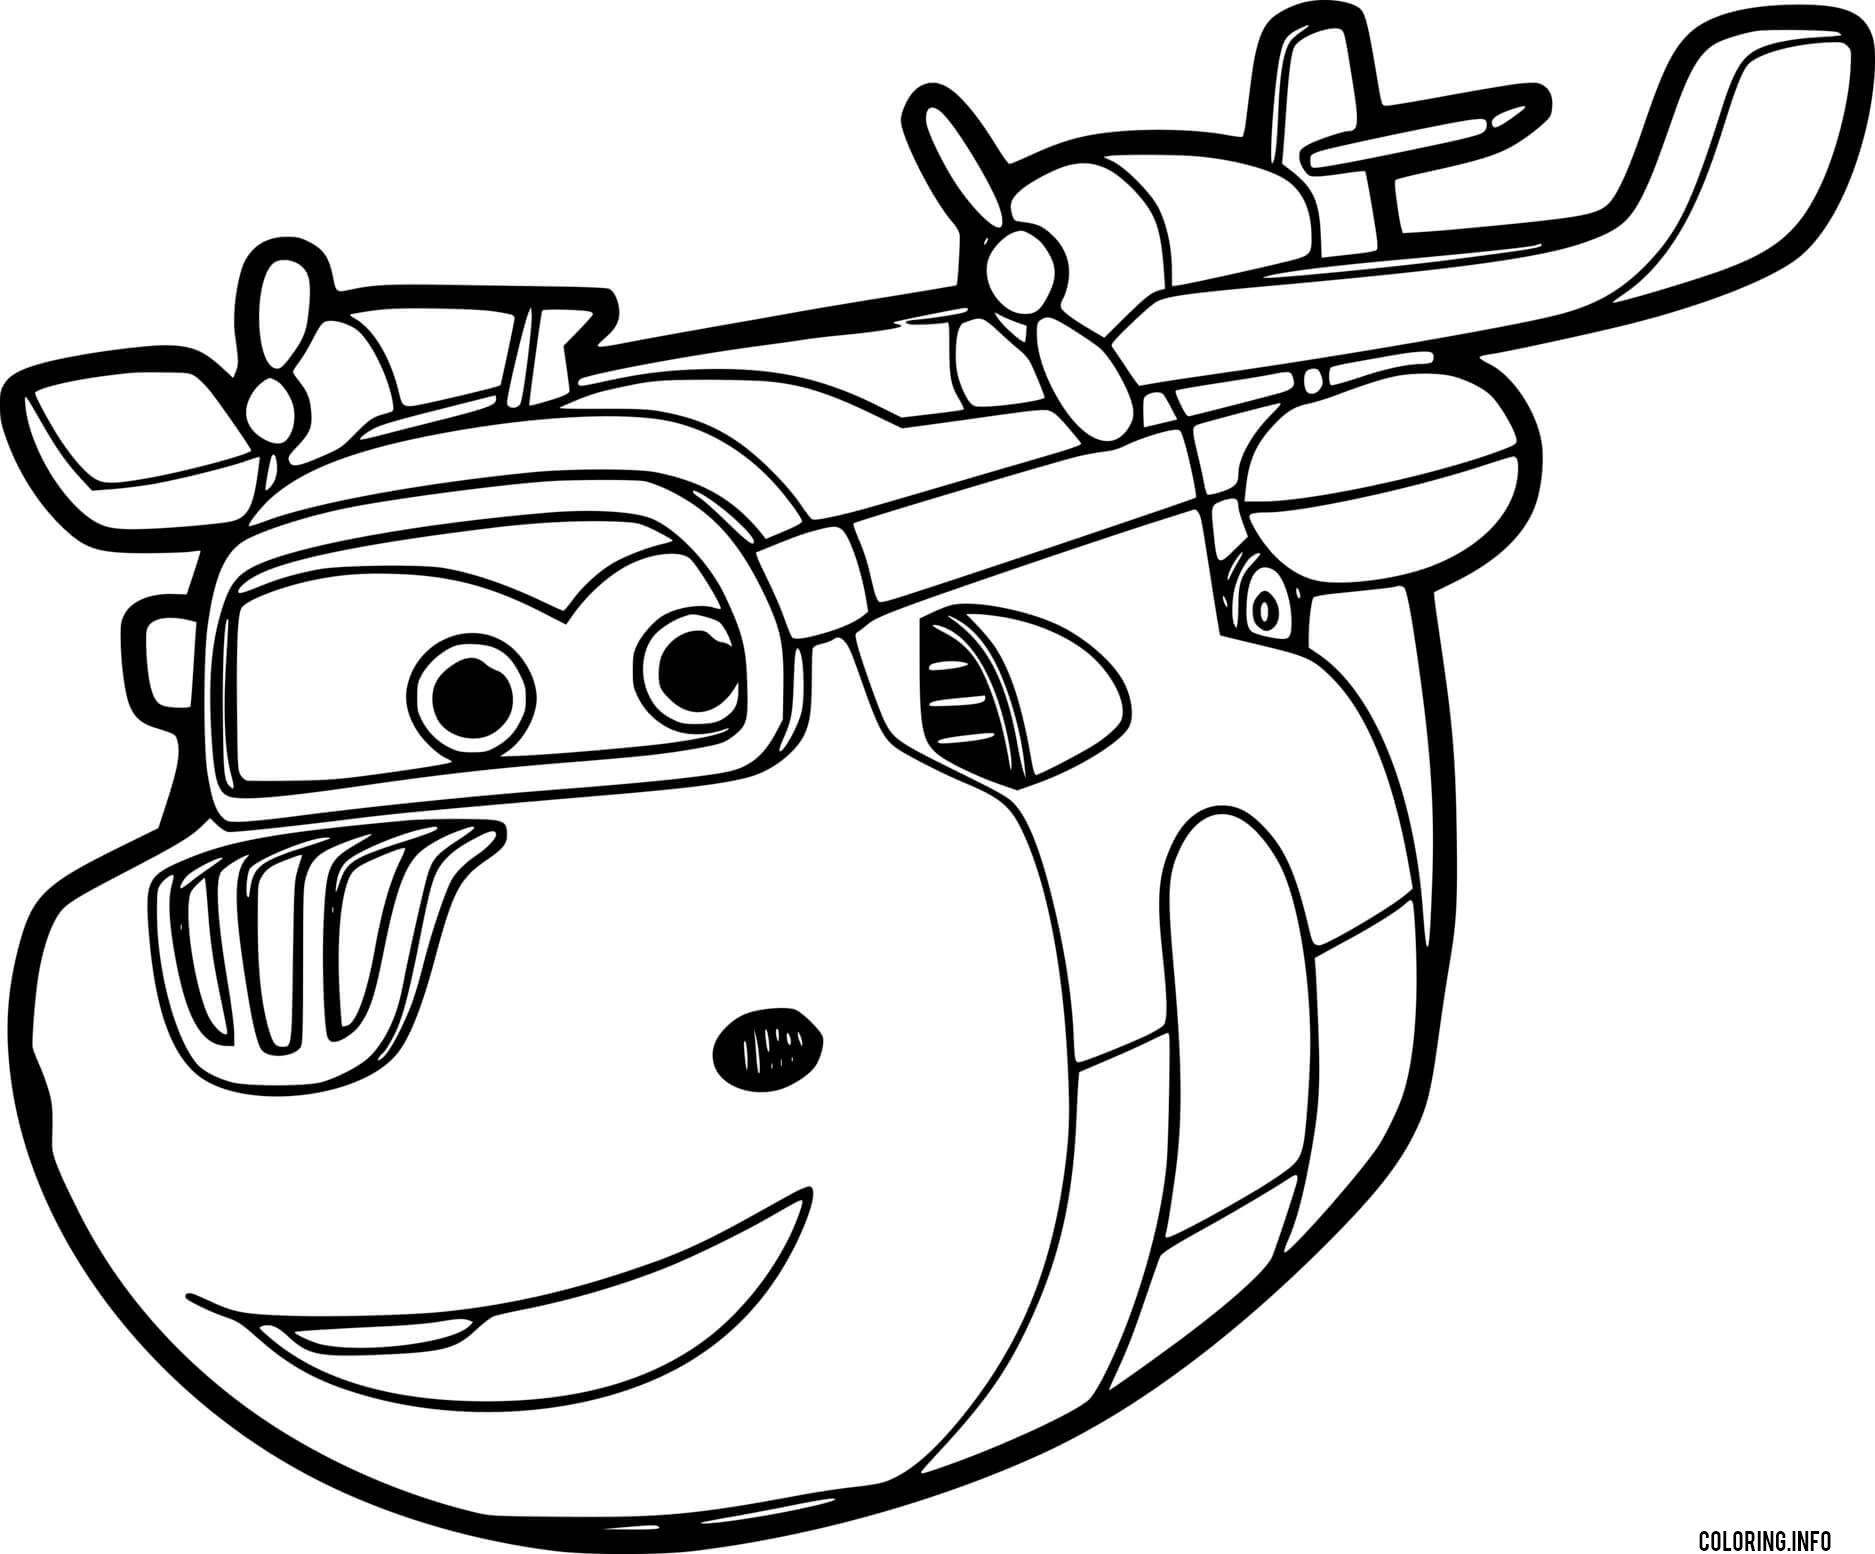 Airplane Donnie From Super Wings coloring